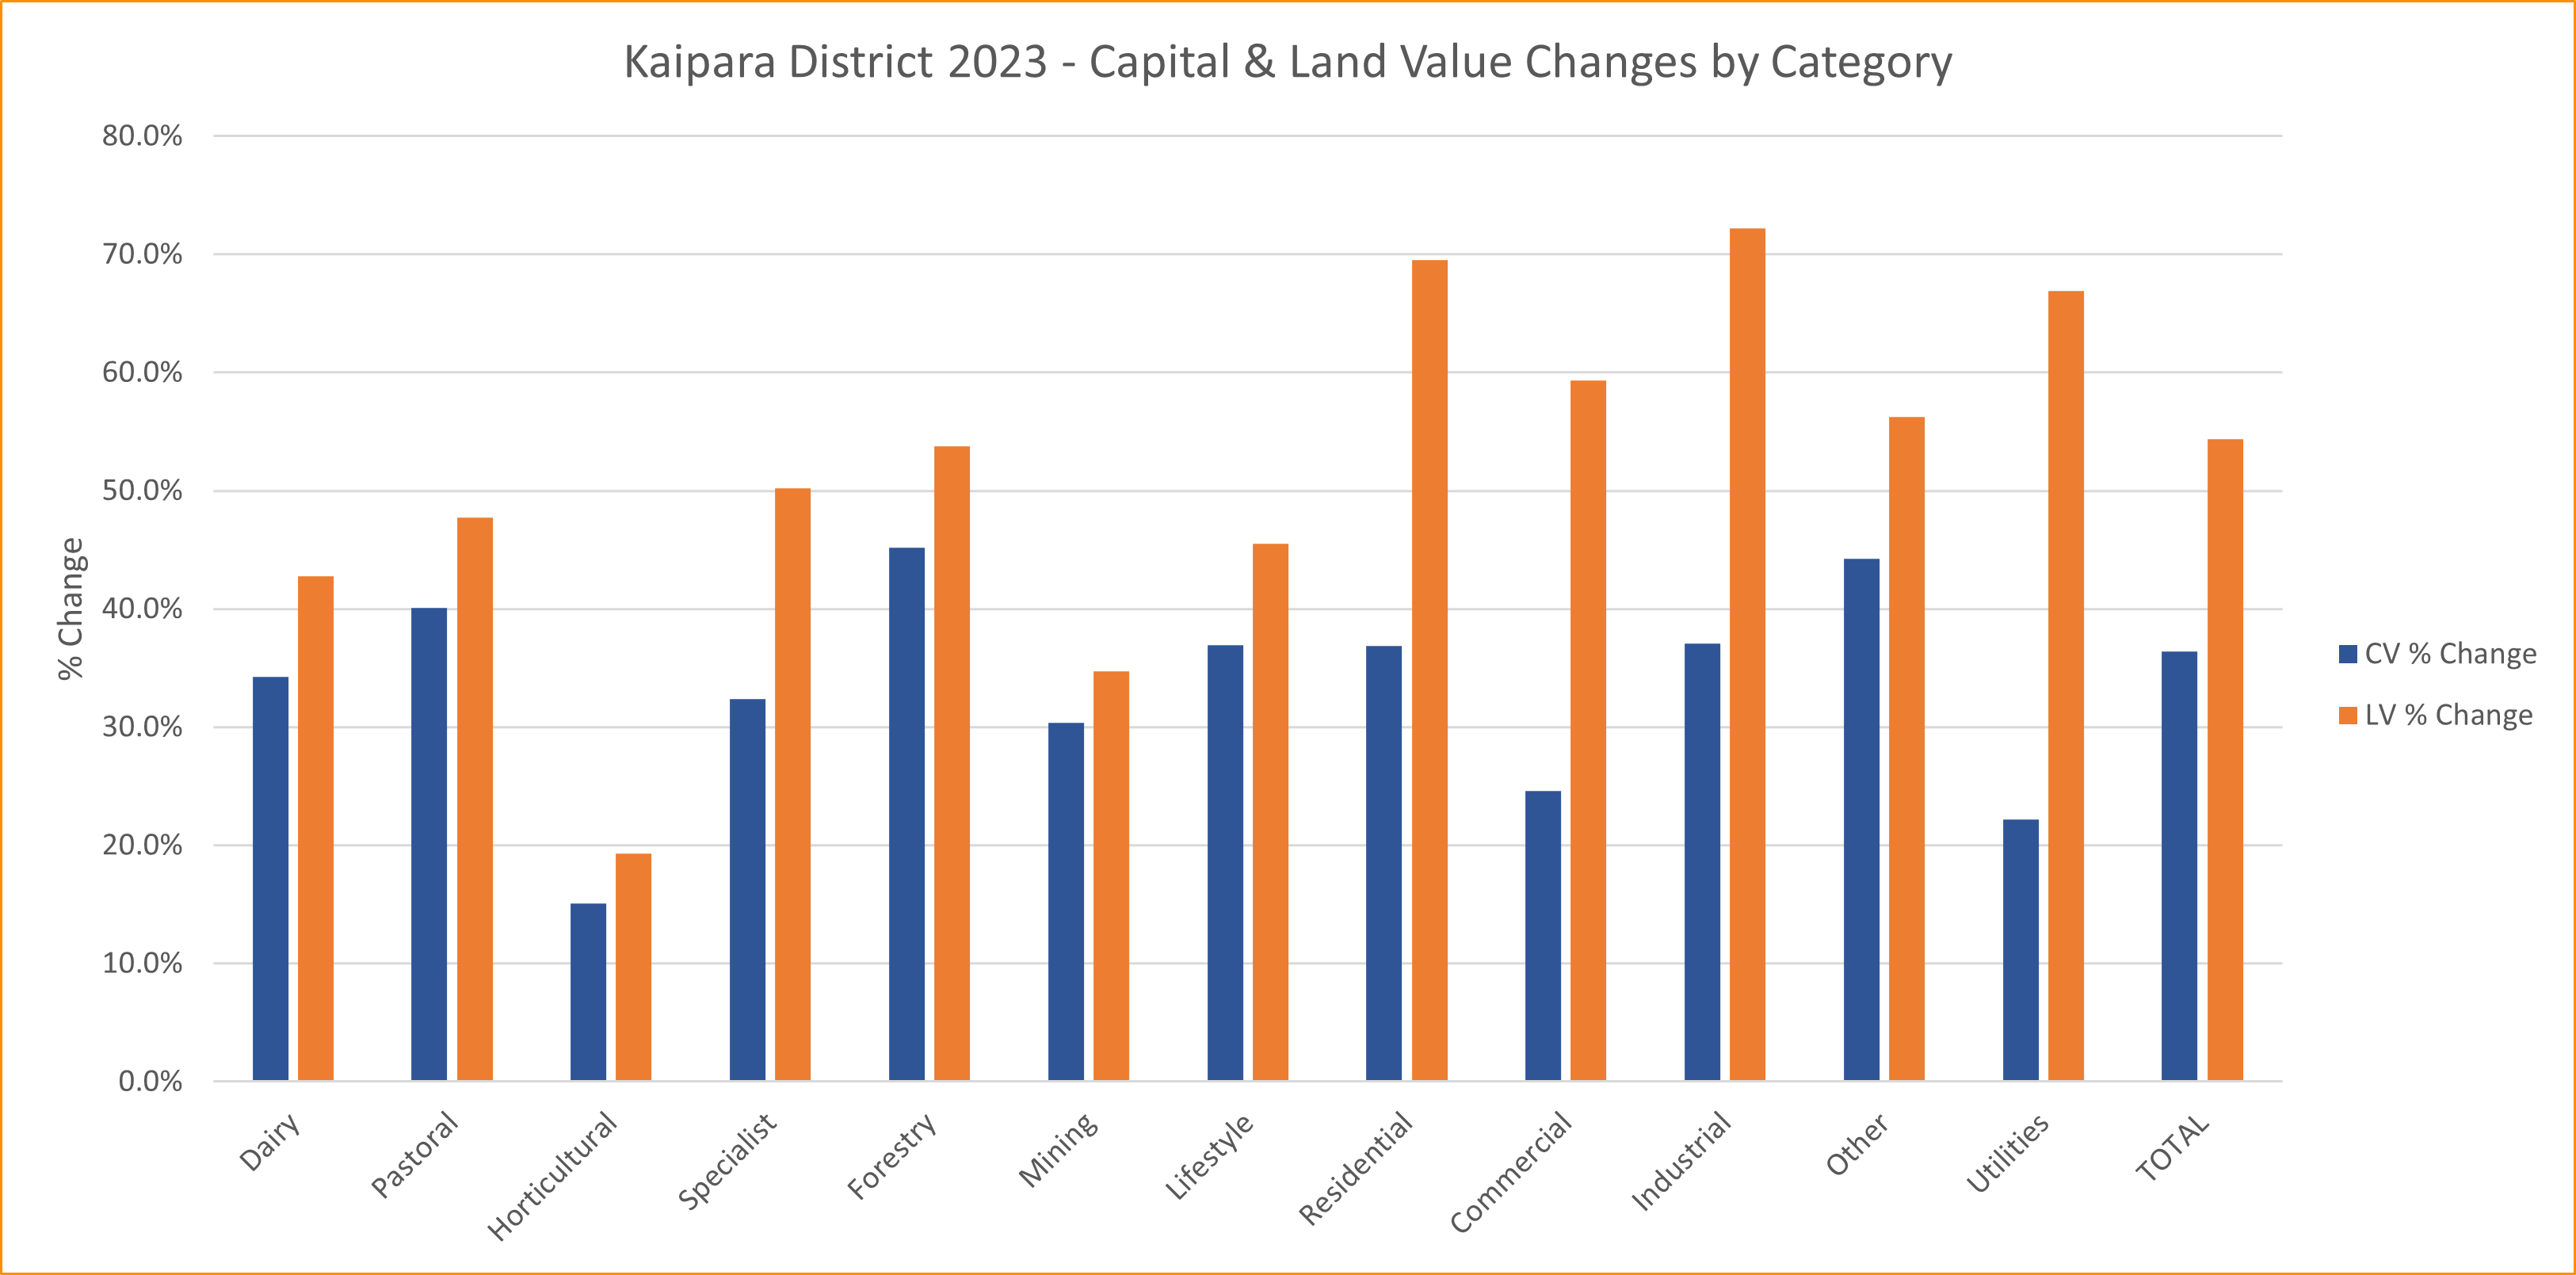 A graph showing capital value and land value change by category.